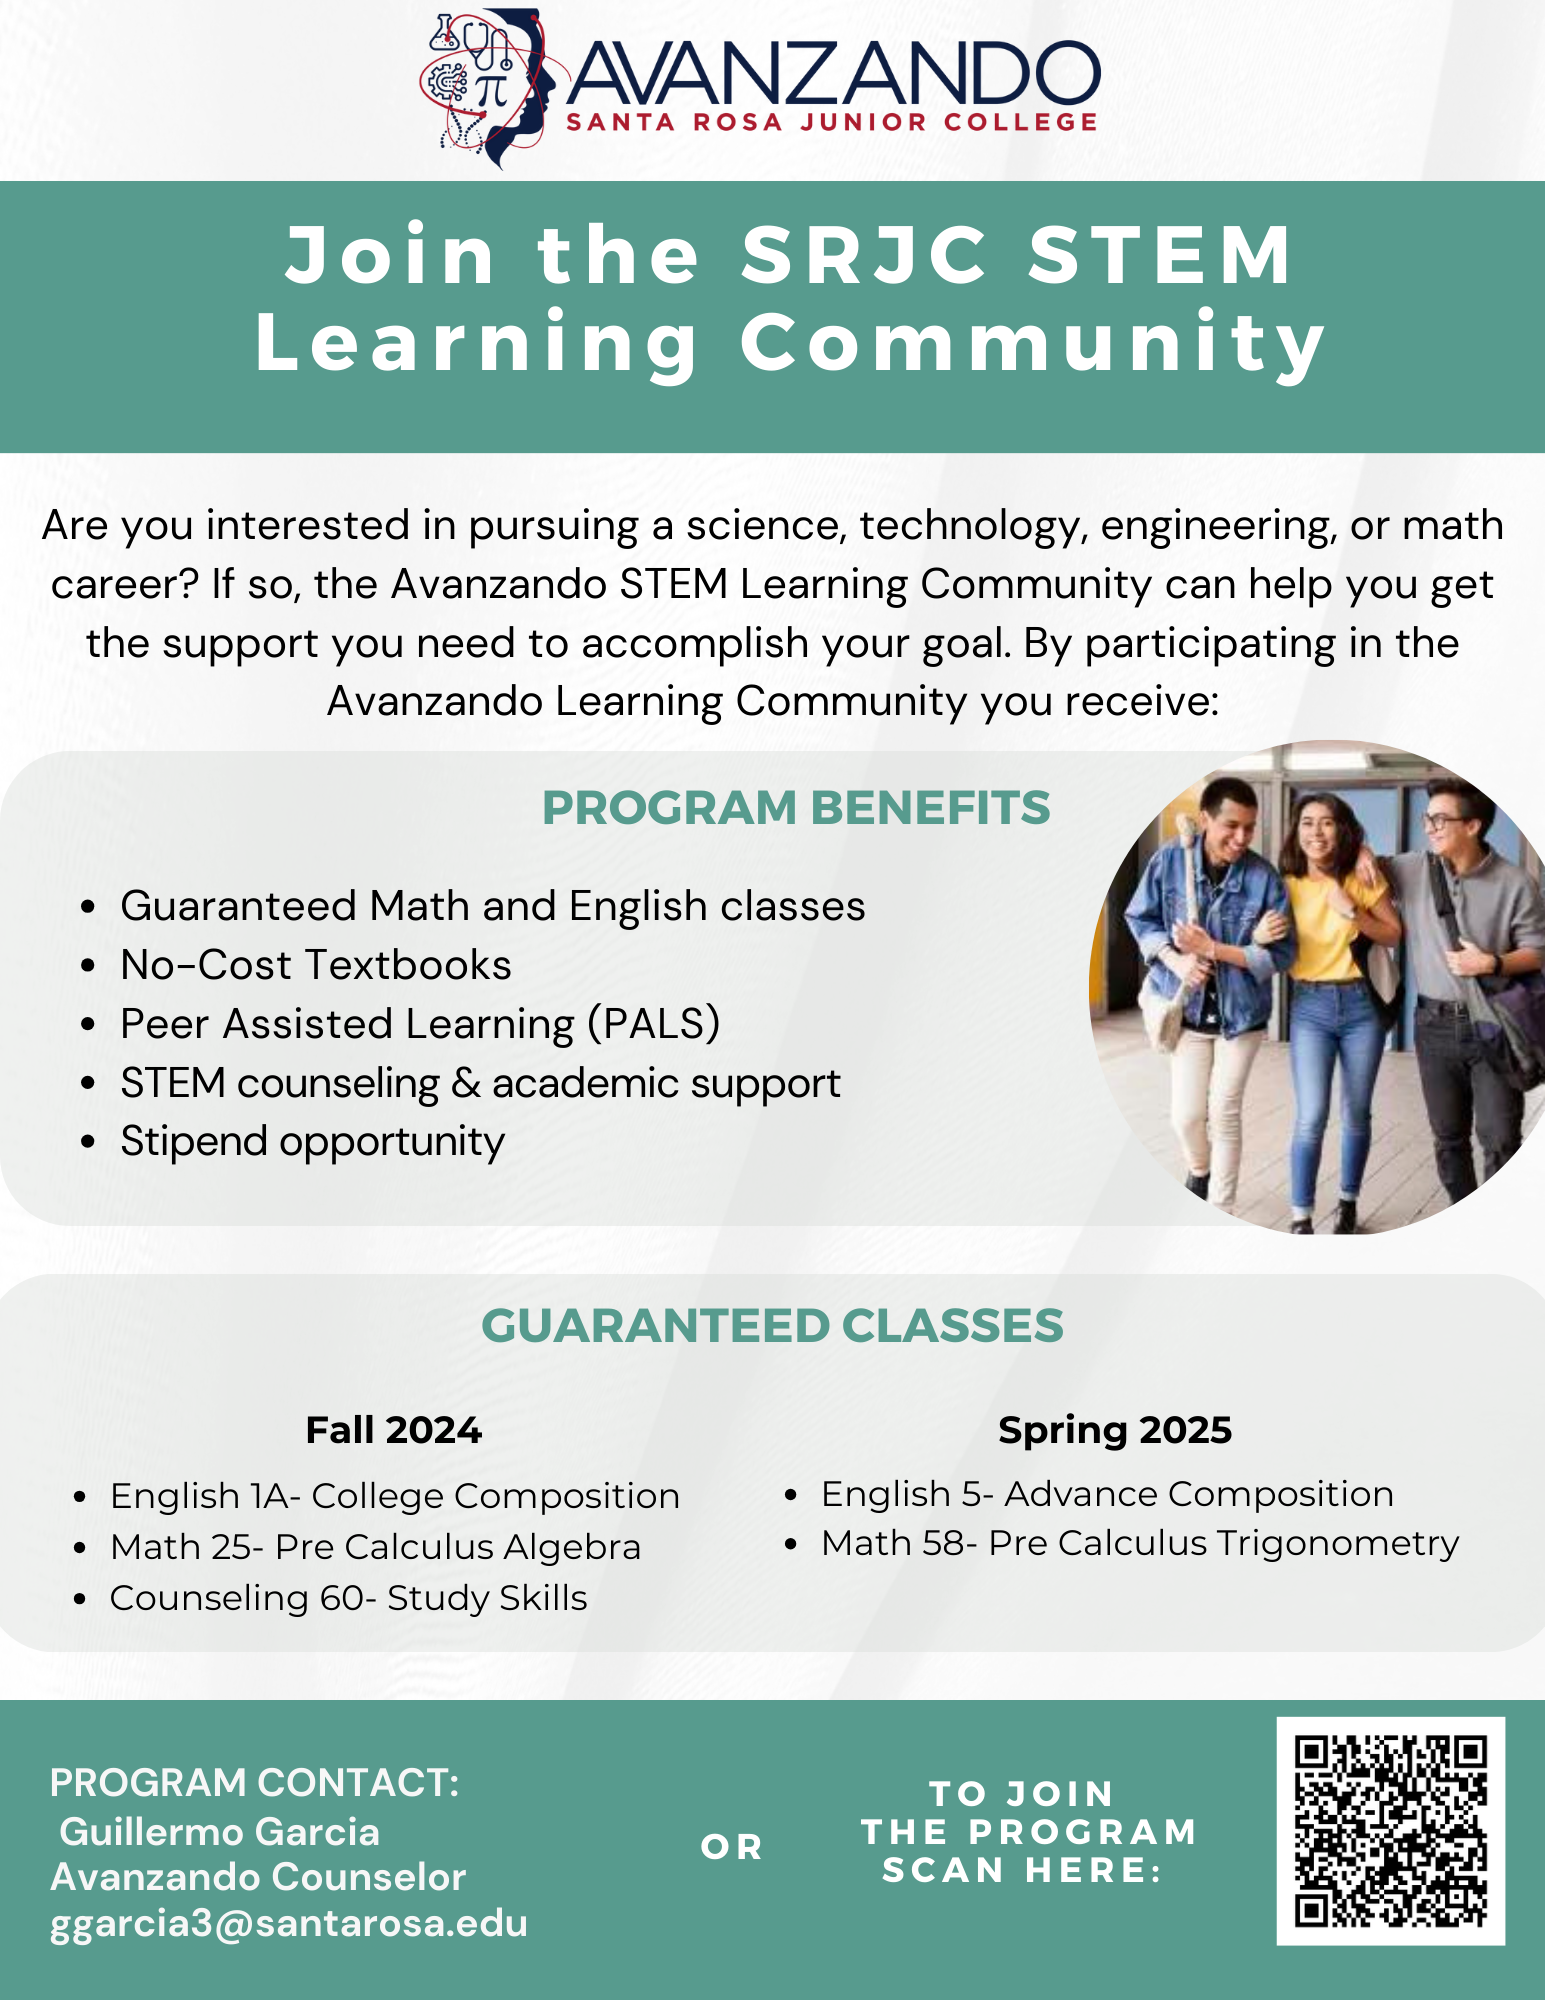 Hello,   SRJC is proud to announce an opportunity for students interested in pursuing a STEM major in college. This year, SRJC has created a learning community where we link transfer level English and Math courses for one academic year with additional support. For students to excel, we understand they need a strong foundation; therefore, by participating in the Avanzando STEM learning community, students will have an academic counselor who will help participants from enrollment to program completion. This means students will receive help selecting classes, finding money for college, and exploring transfer options. In addition, this program will provide academic support by having a Peer Assisted Learner (PALS) in the classroom, and students will have the opportunity to receive stipends for meeting program requirements.   Fall 2014 Avanzando STEM Learning Community Schedule:  Math 25  section 2008 M W 1:30pm-3:30pm English 1A section 0110, T Th 11:00am-1:00pm  Counseling 60-section 2013, W 9:00-11:00am     If you are a student interested in STEM, this program would be the first stepping stone to a rewarding career in the sciences. We are looking for first-generation college students who are traditionally underrepresented in the sciences.     Attached is a program flyer with a QR code the student can scan. After scanning the QR code, the student will complete a brief interest form that I will use to follow up with students. Space is limited to ensure we dedicate the time to each student. Link to Avanzando Learning Community Interest Form https://santarosajuniorcollege.formstack.com/forms/avanzando_learning_community_interest_form